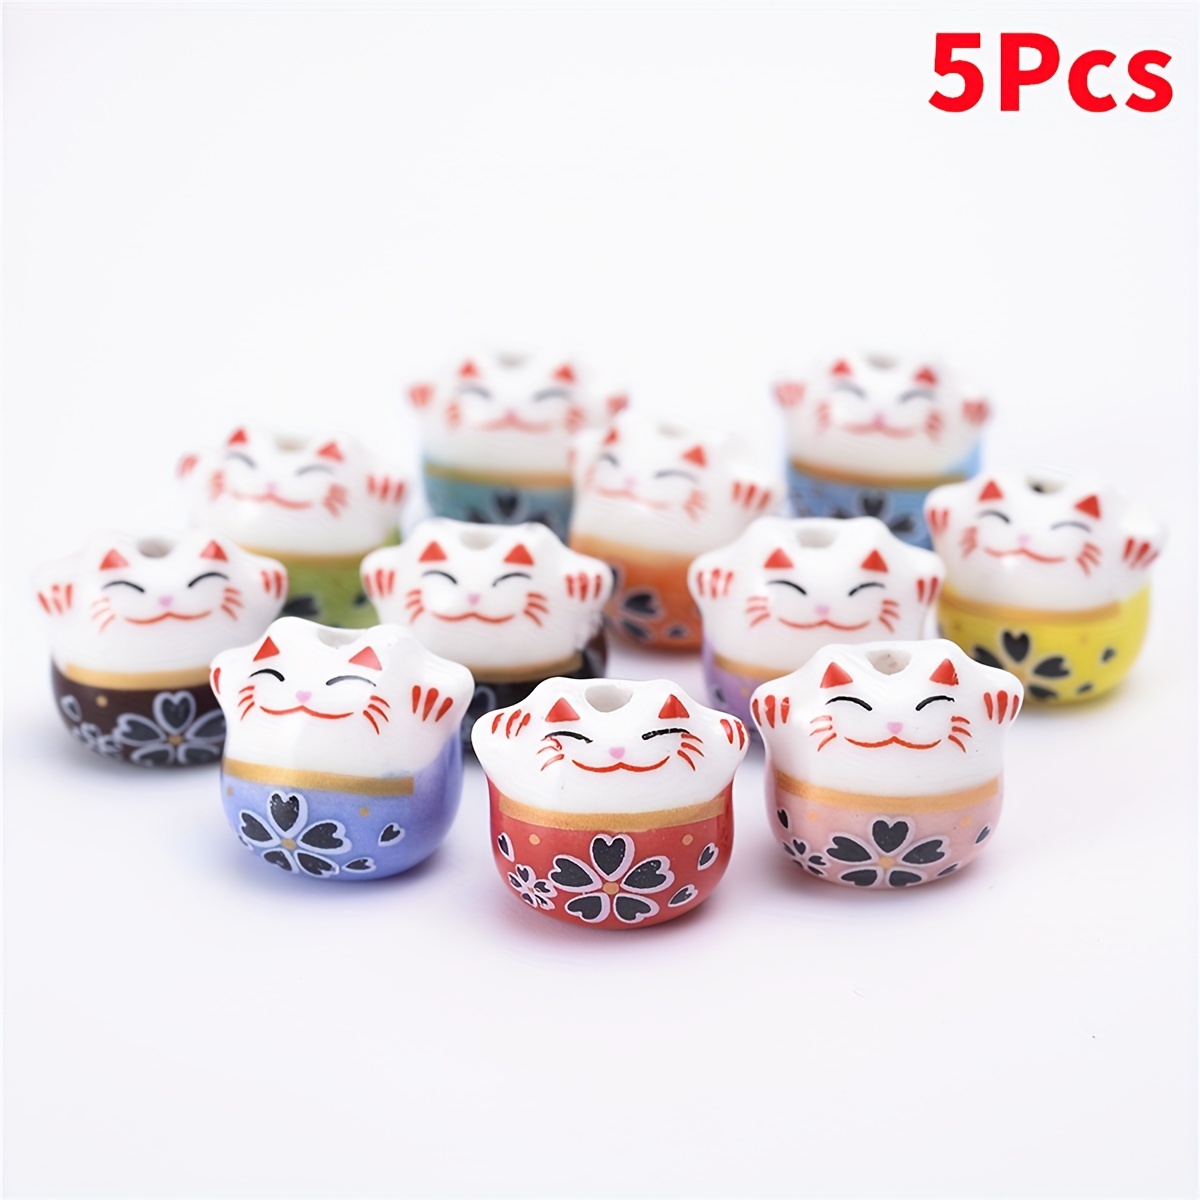 60Pcs 6 Colors Acrylic Cat Head Beads Animal Pet Cat Beads Cute Bead in  Bead Kitten Shape Beads for Jewelry Crafts Making - AliExpress